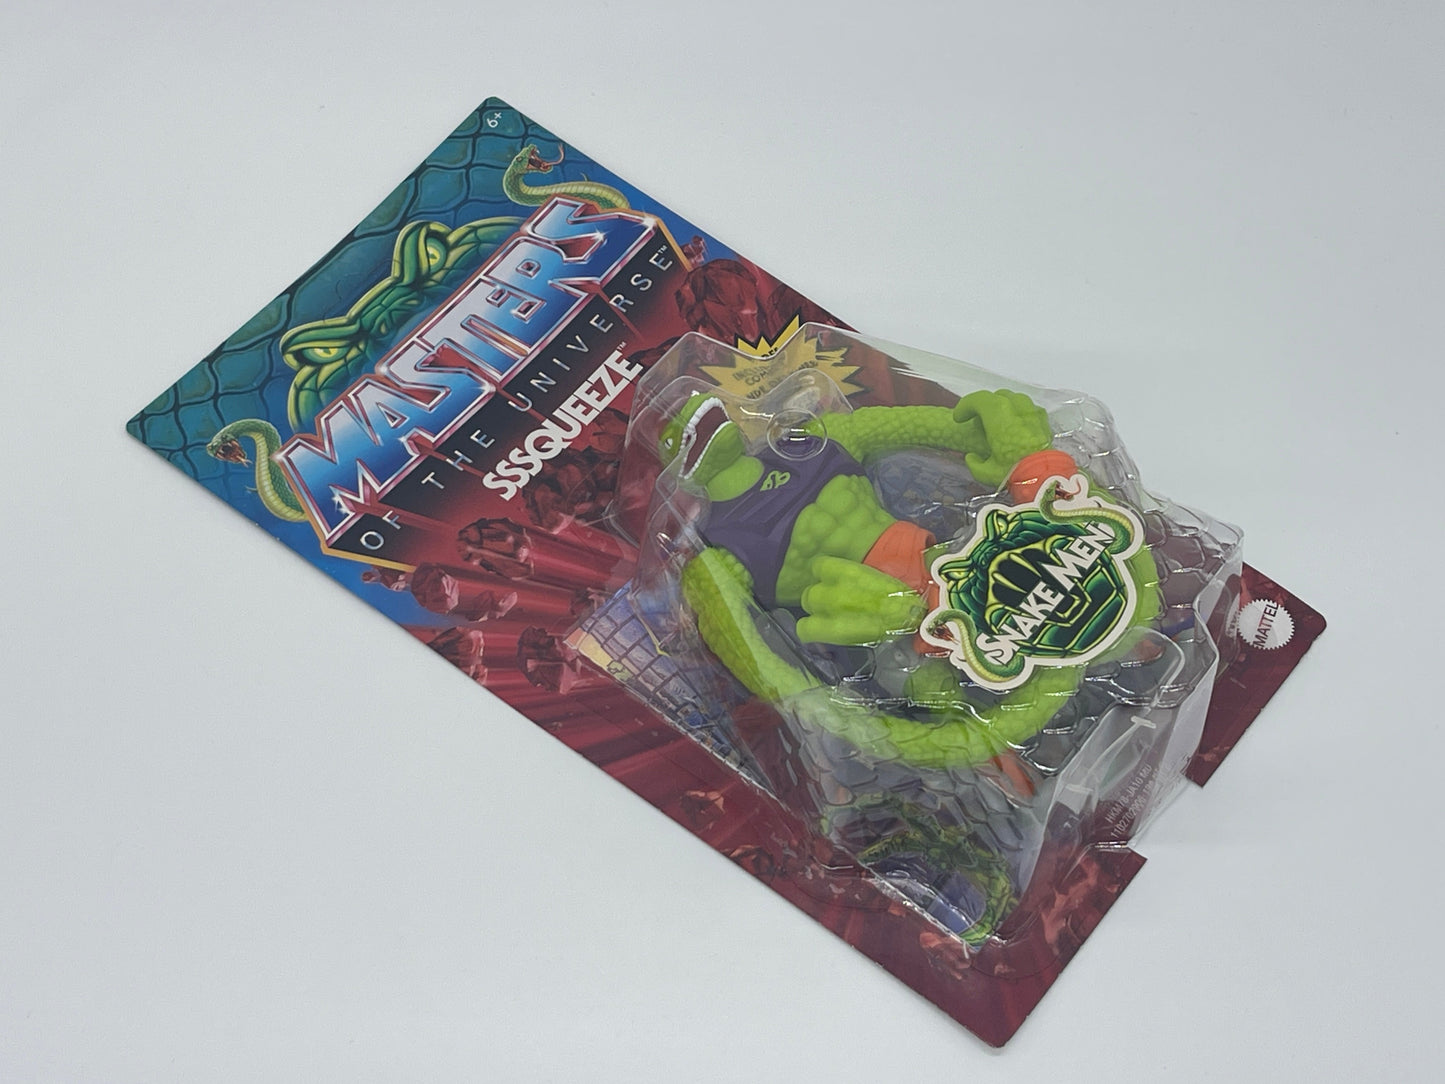 Masters of the Universe Origins "Sssqueeze" Snake Men unpunched MOTU (2023)